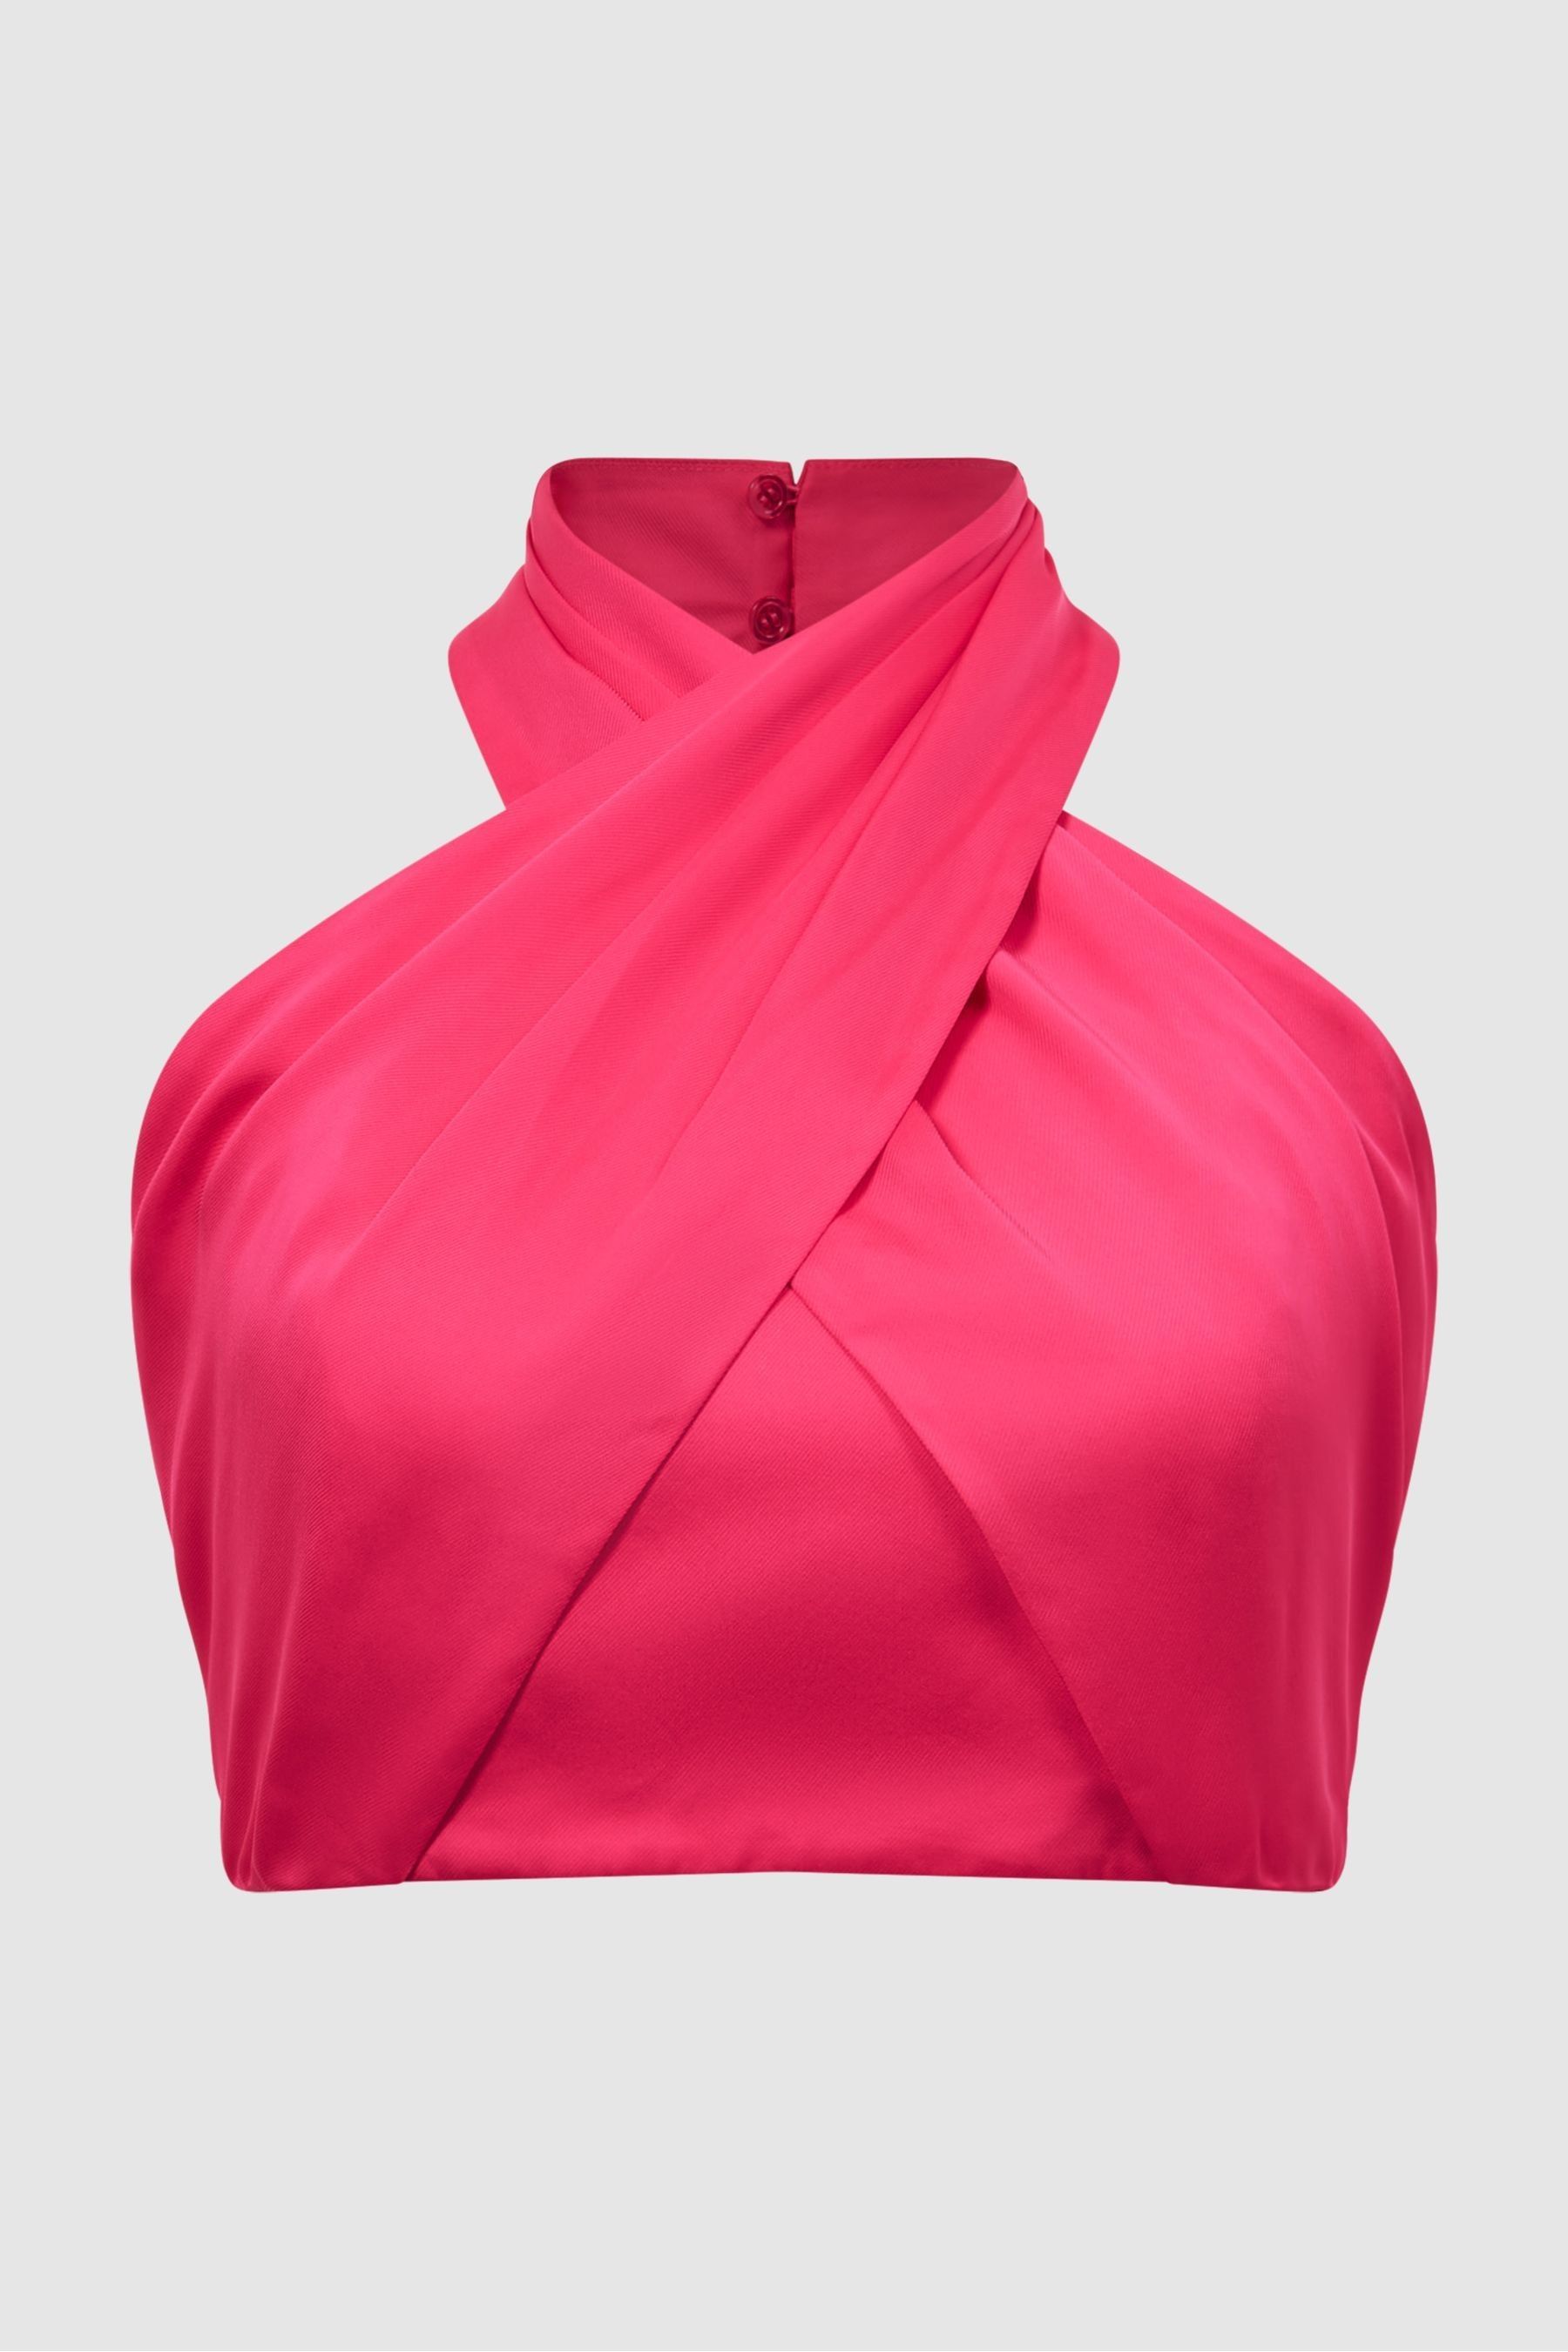 Buy Reiss Pink Ruby Cropped Halter Occasion Top from the Next UK online ...